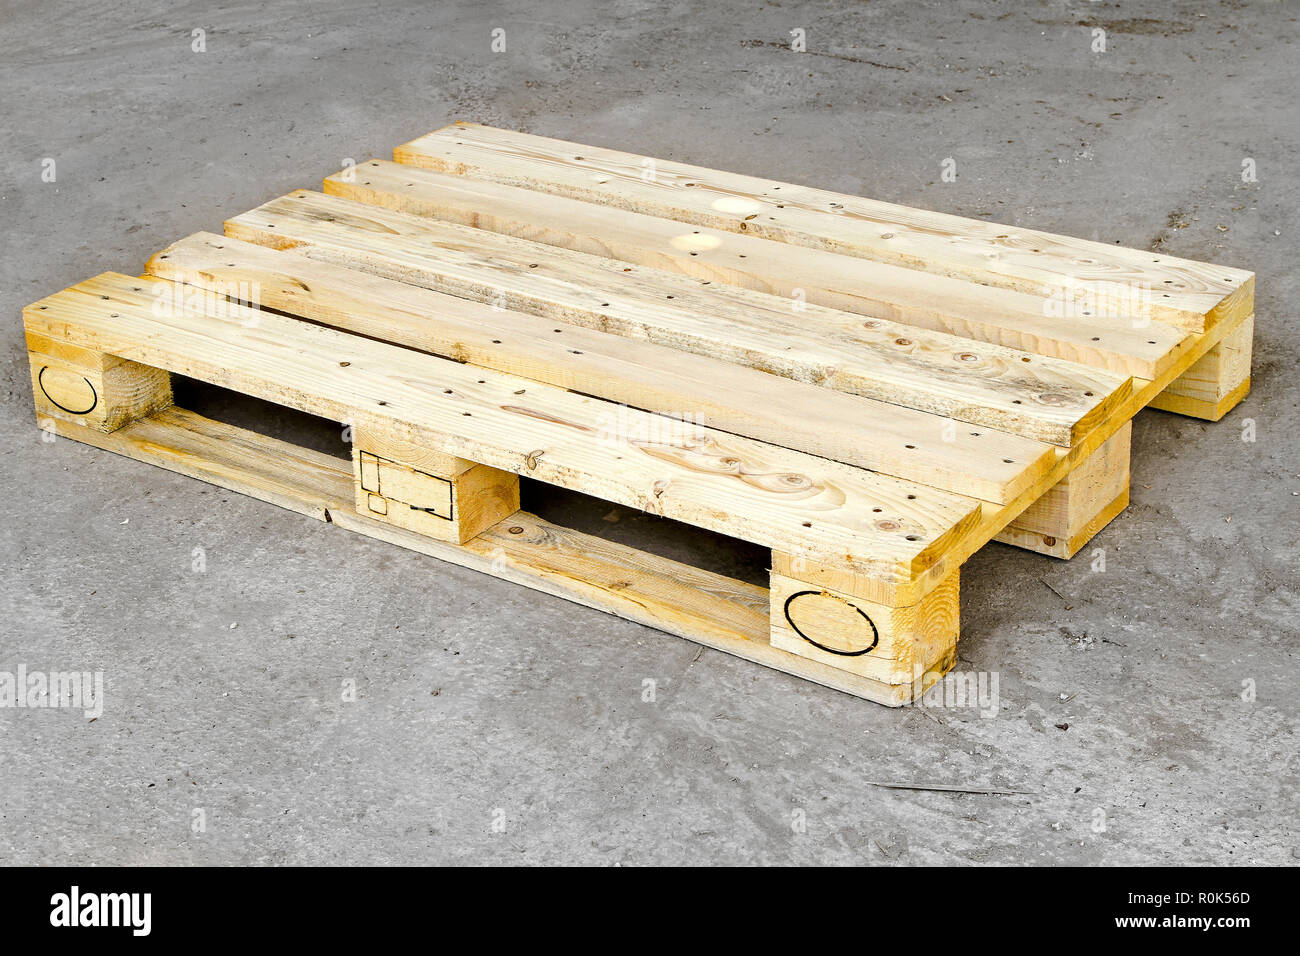 Cargo wooden euro pallet in standard dimensions Stock Photo - Alamy